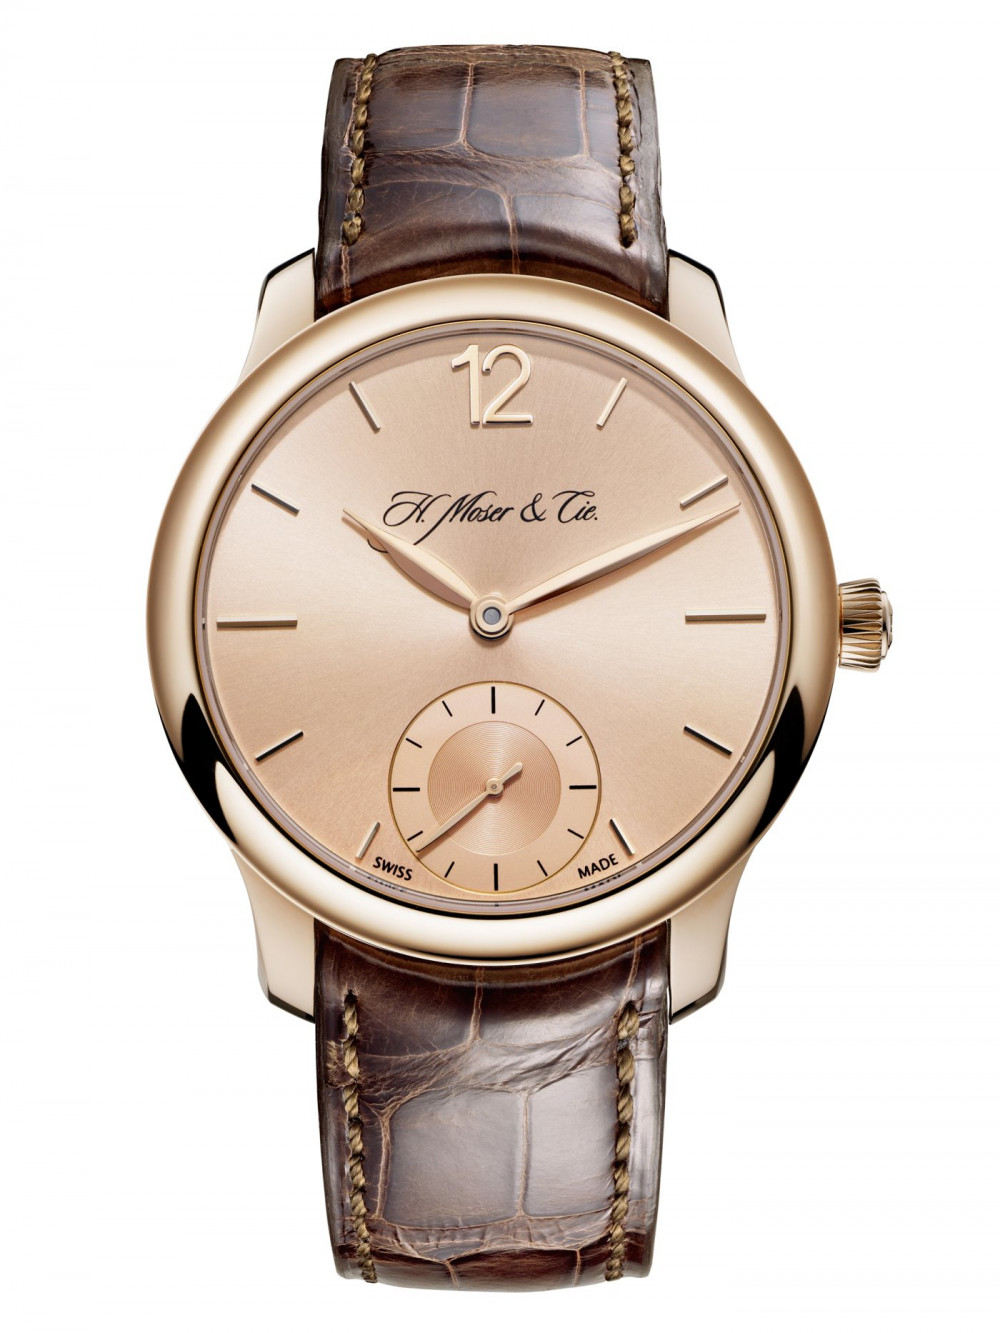 Zegarek firmy H. Moser & Cie, model Endeavour Small Seconds Rotgold Rotgold